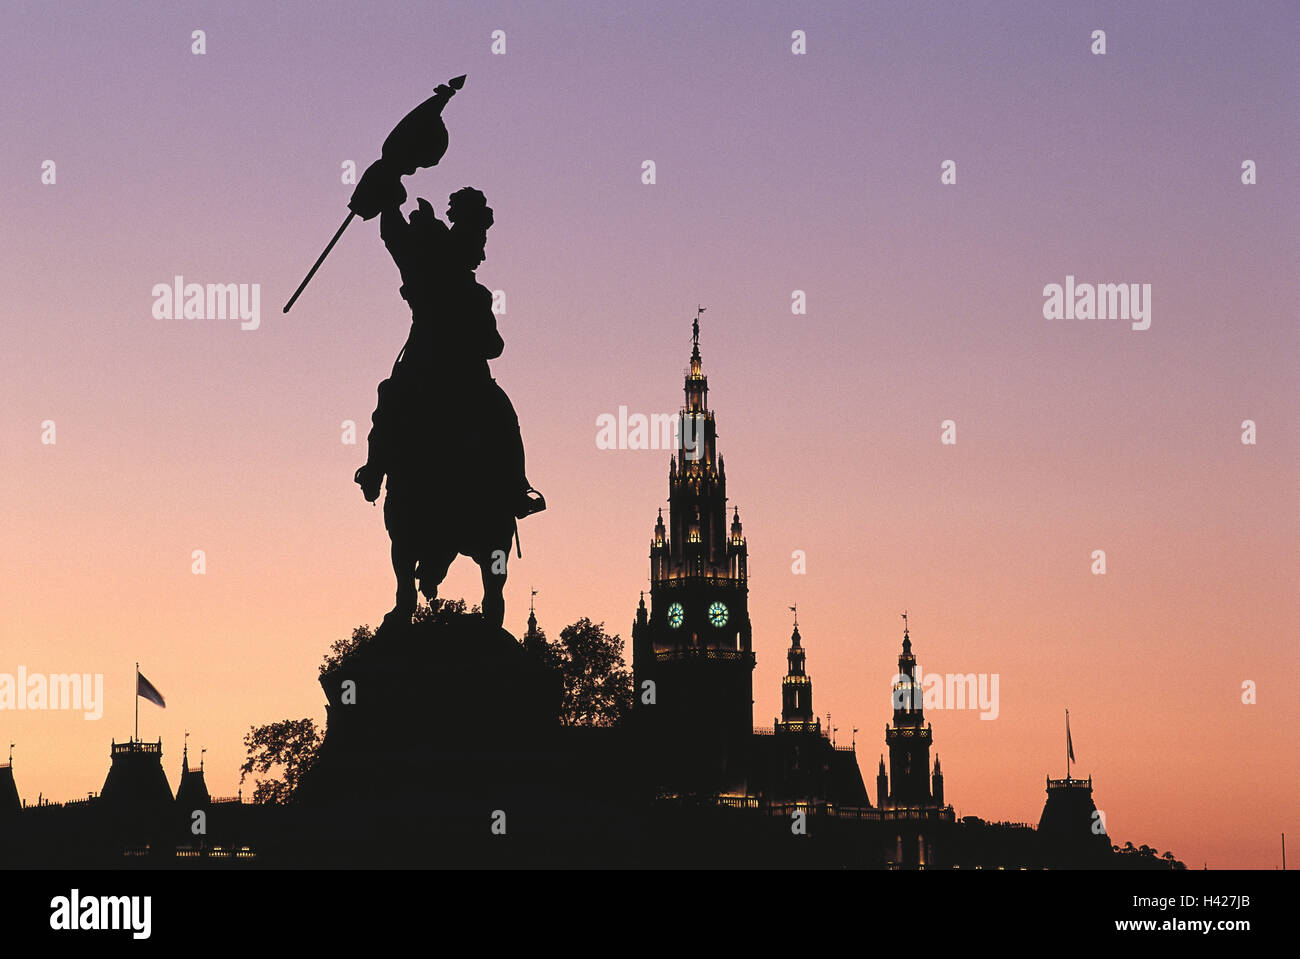 Austria, Vienna, heroic space, silhouette, equestrian statue archduke Karl, background, city hall, evening mood, Europe, capital, city hall building, structure, in 1872-83, builder Friedrich von Schmidt, architectural style, architecture, new Gothic, tower height 97.9 m, landmarks, place of interest, culture, space, freeze frame, bleed, monument, recollection, icon, conception, defence, superiority, overview, sublimity, power, inspiration, overview, consideration, afterglow Stock Photo